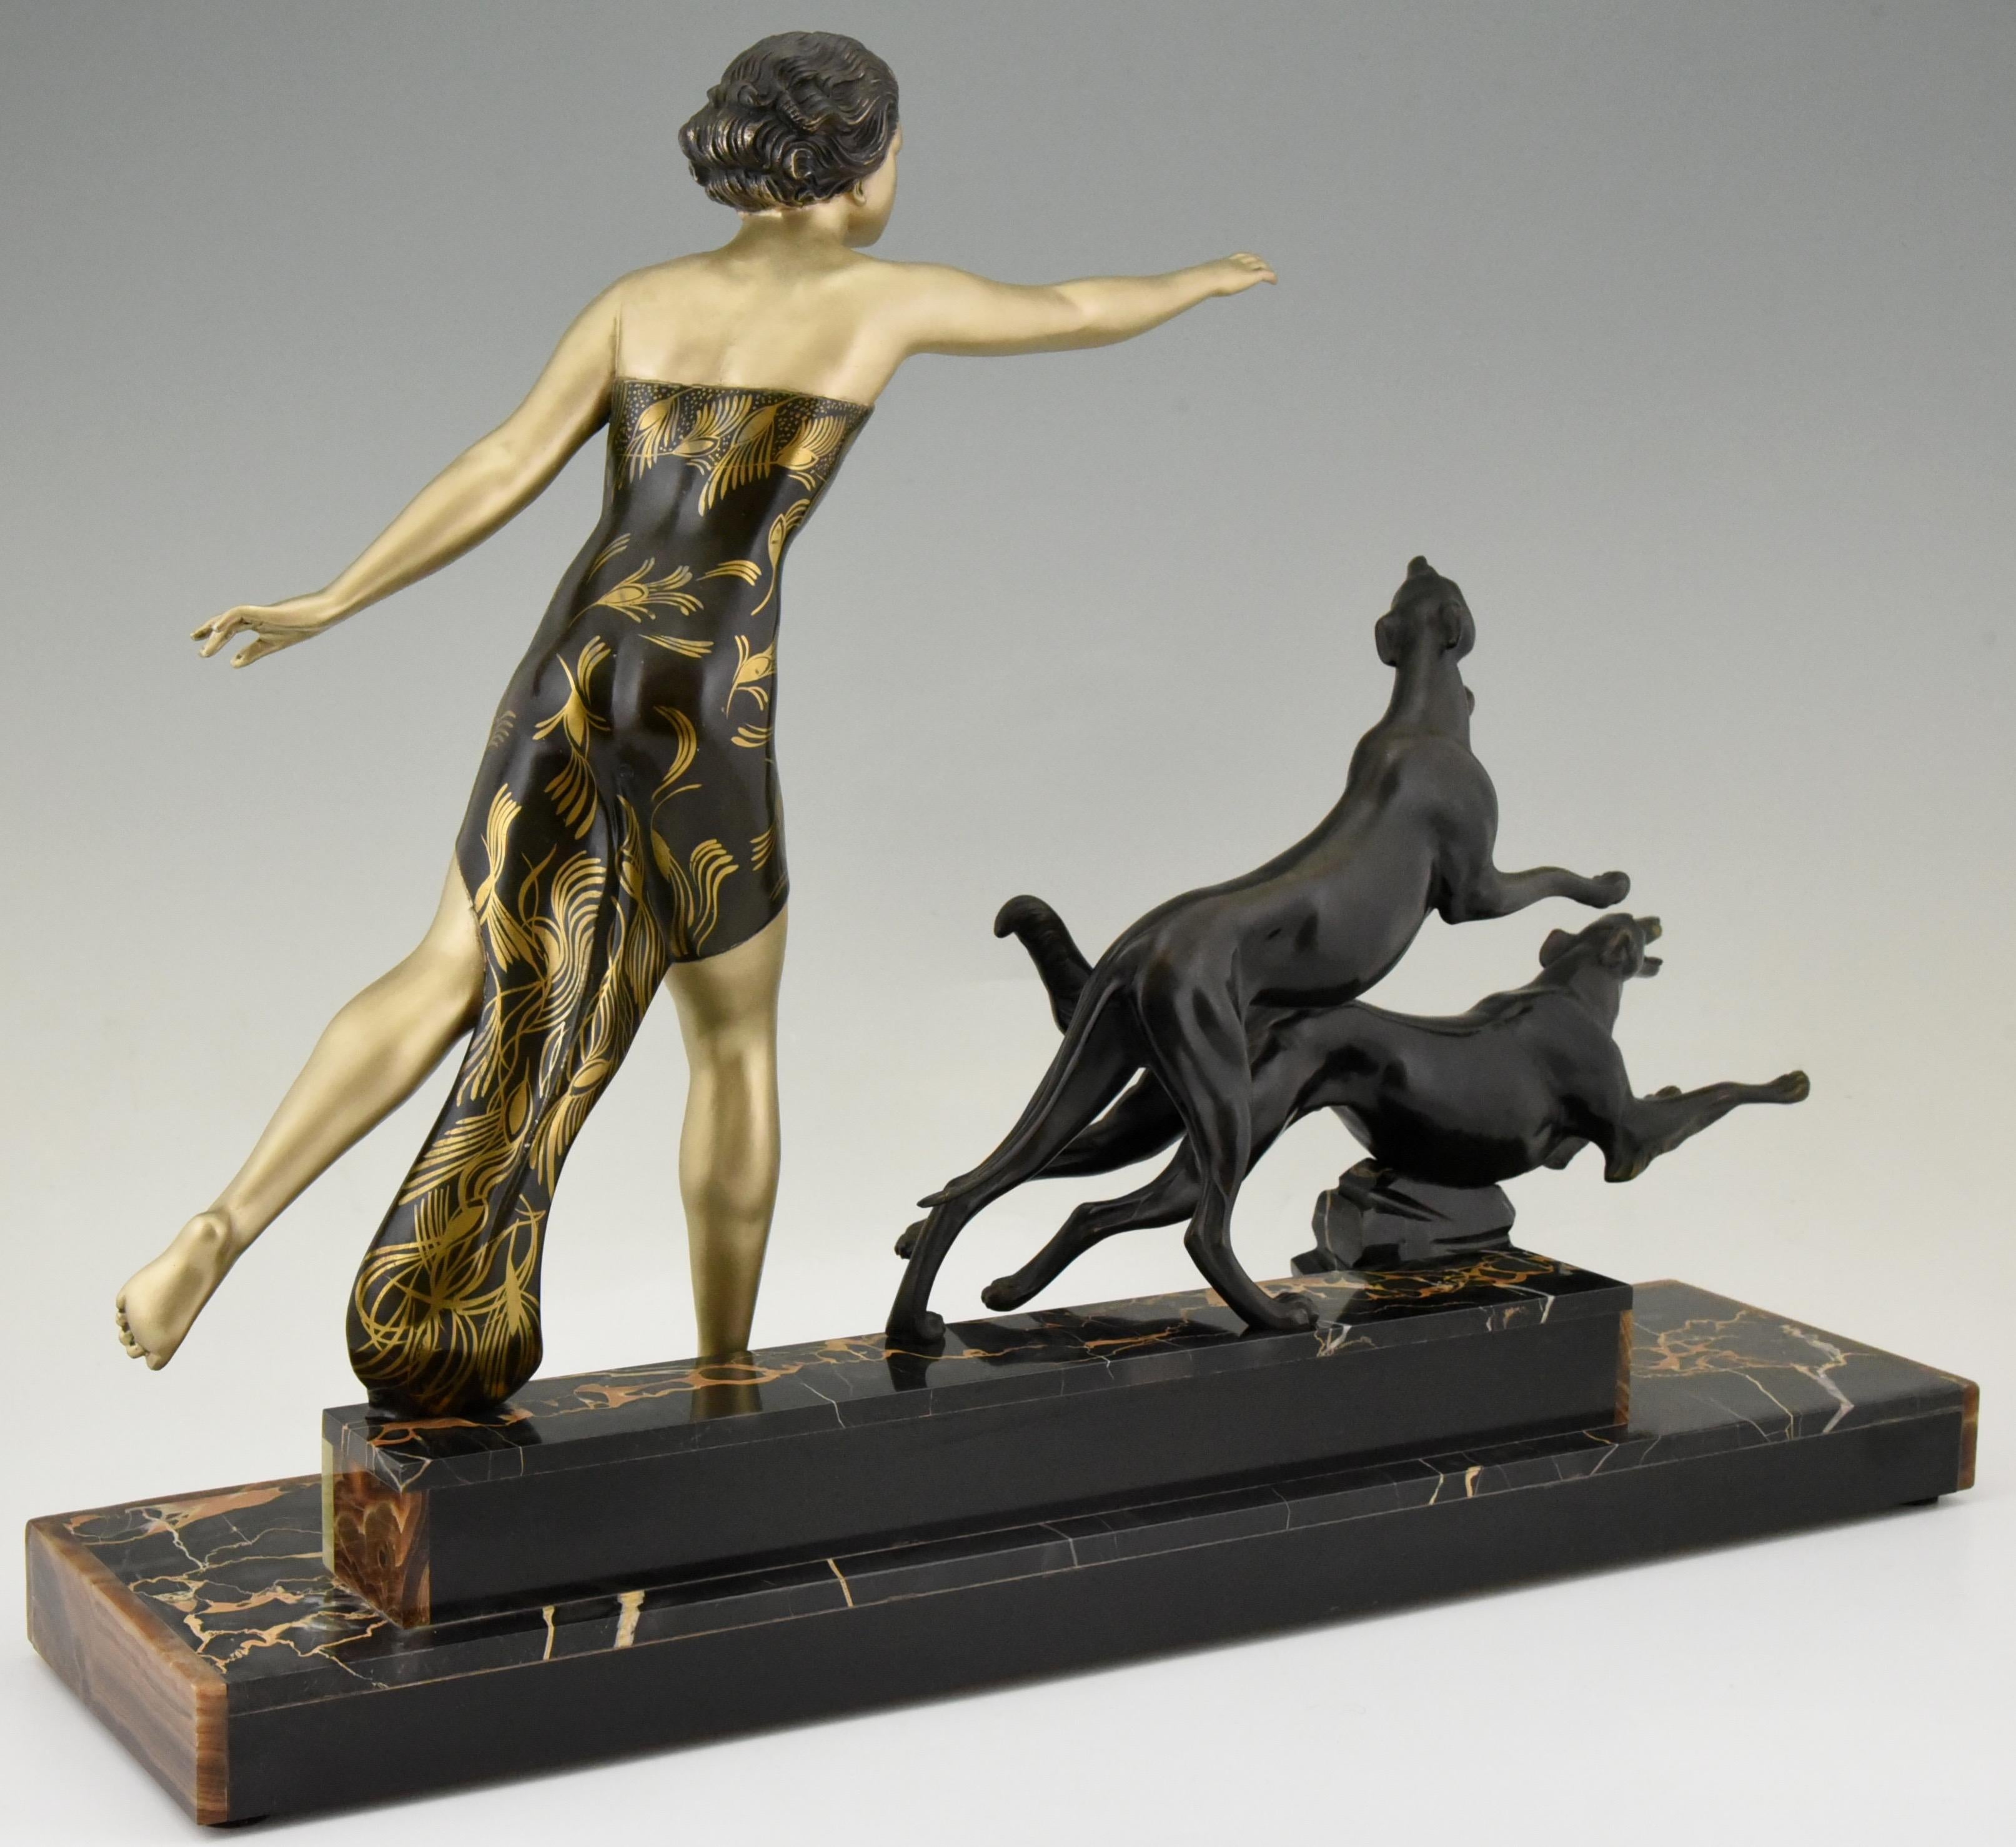 20th Century Art Deco Sculpture Lady with Dogs by Uriano, France, 1930